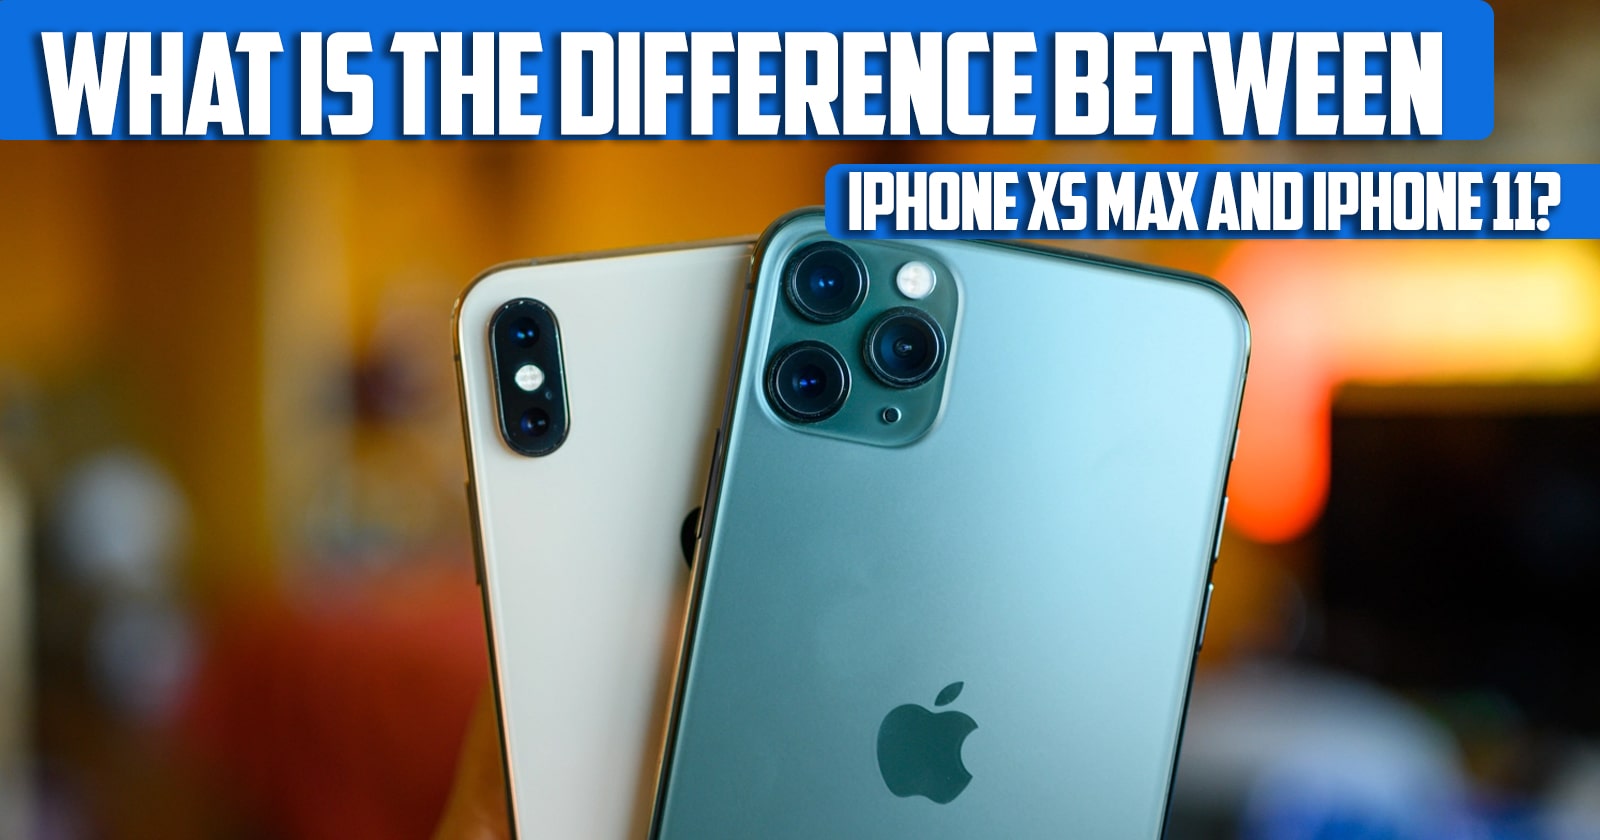 What is the difference between iPhone XS max and iPhone 11?